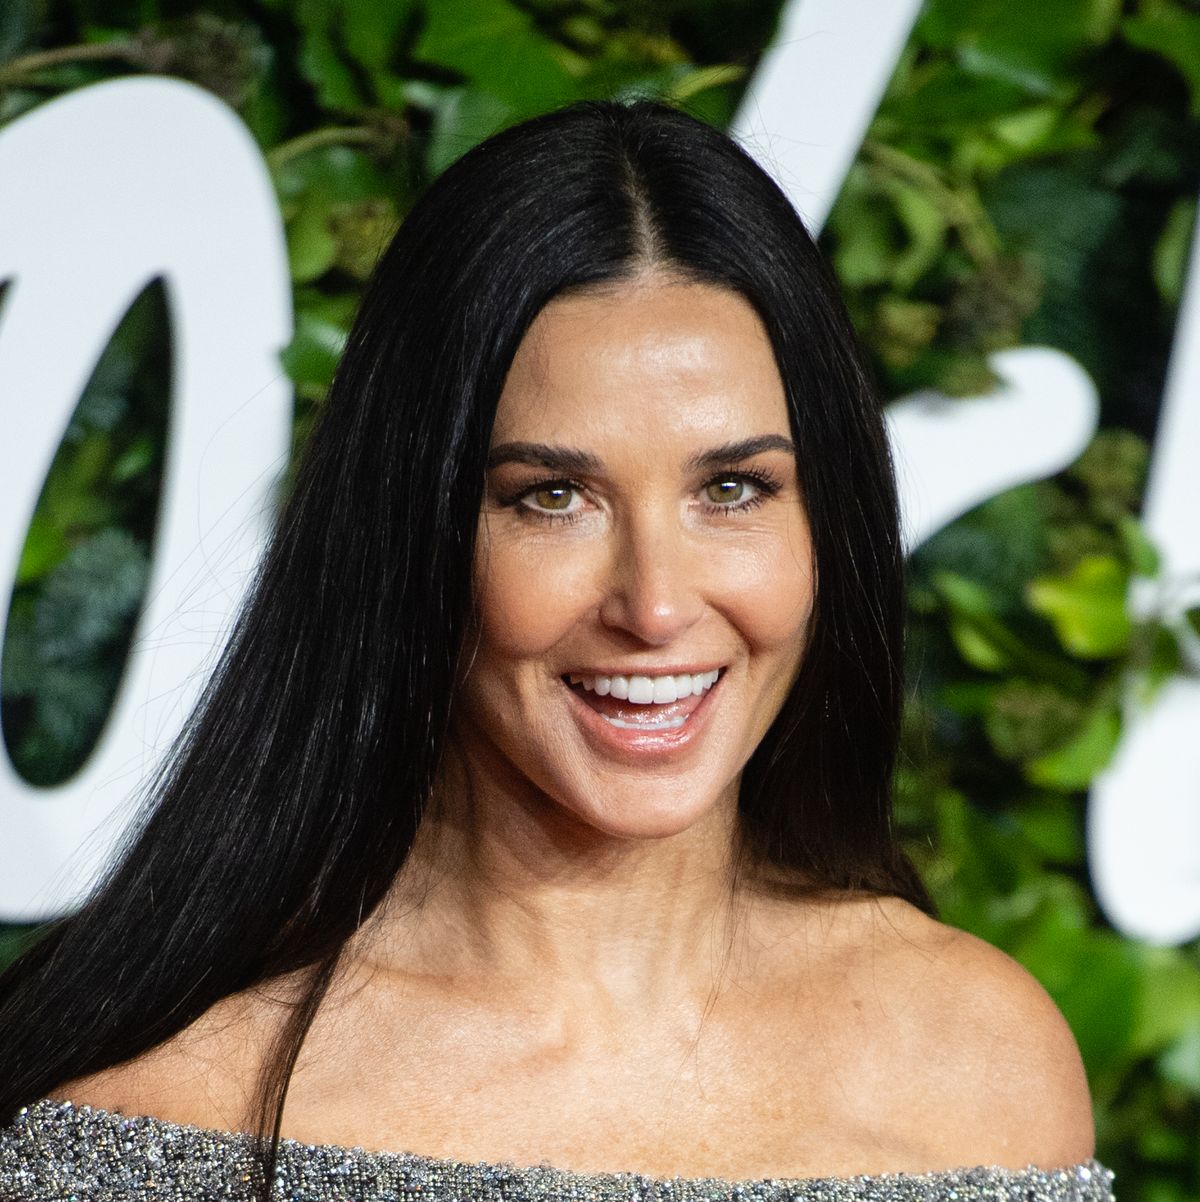 Demi Moore Sex Tape - Demi Moore Is Excited to Turn 60: 'I Feel More Alive and Present'